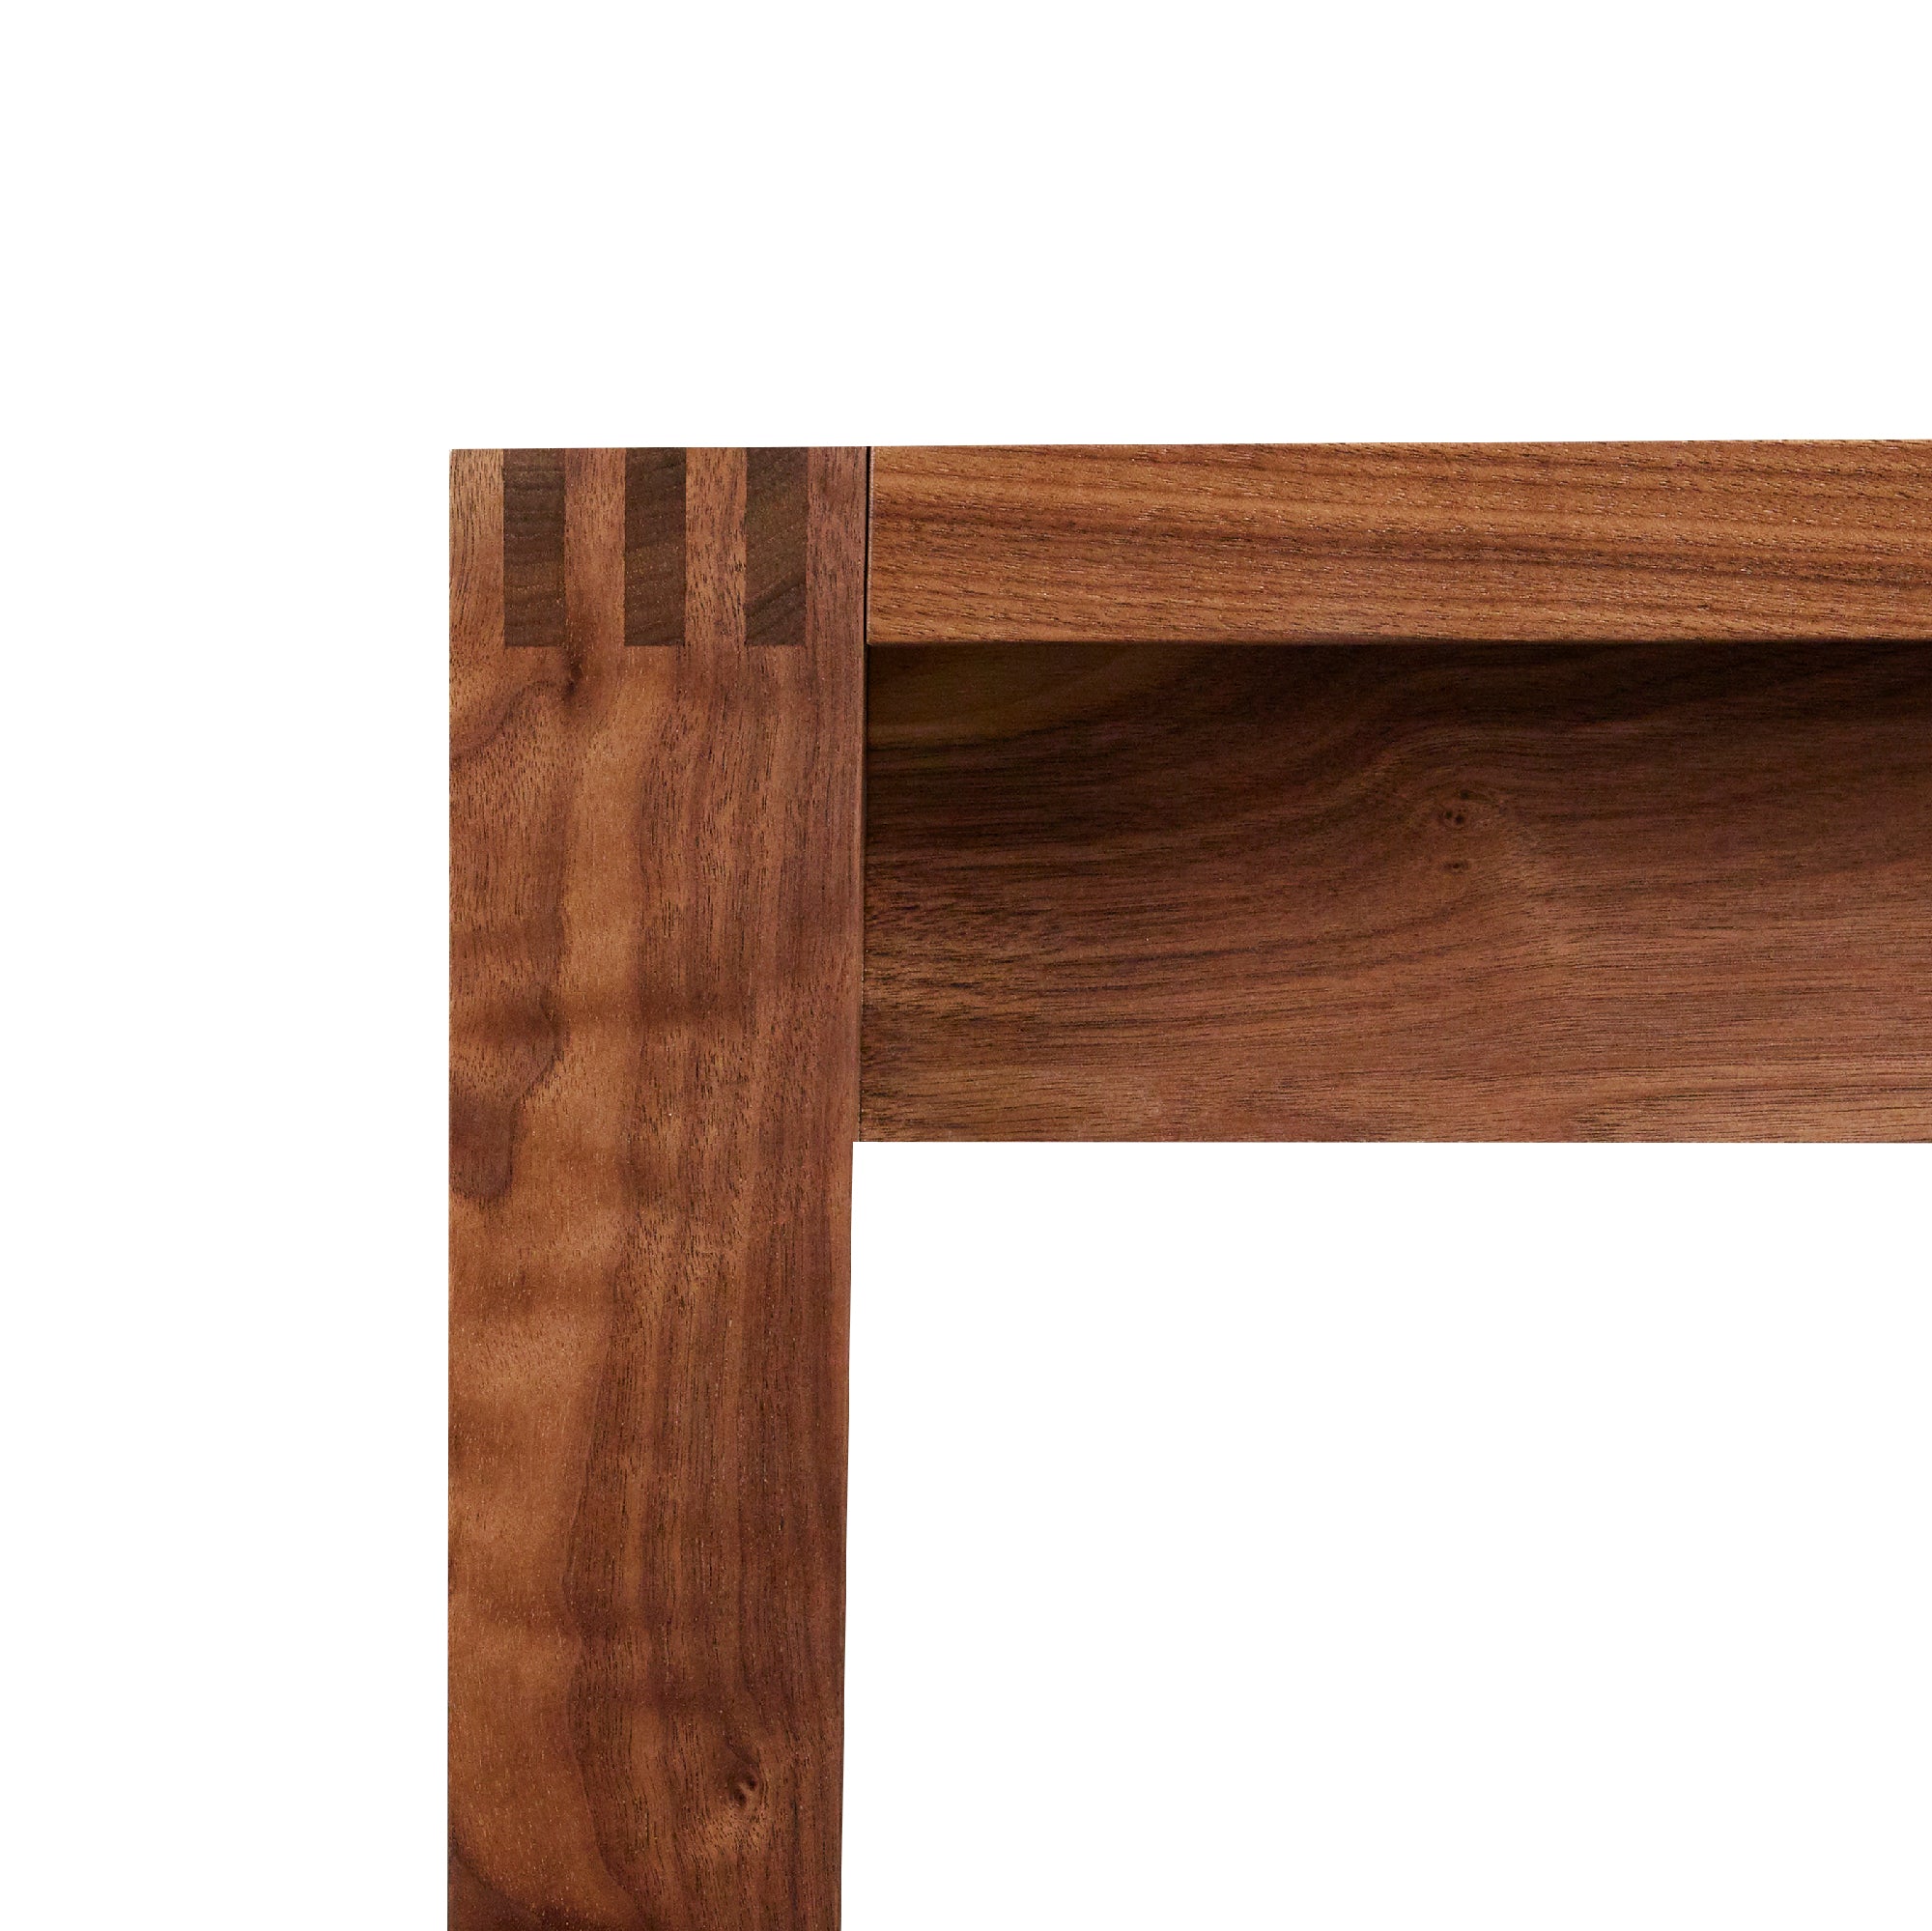 Finger joinery in solid walnut on the Harbor Dining Table